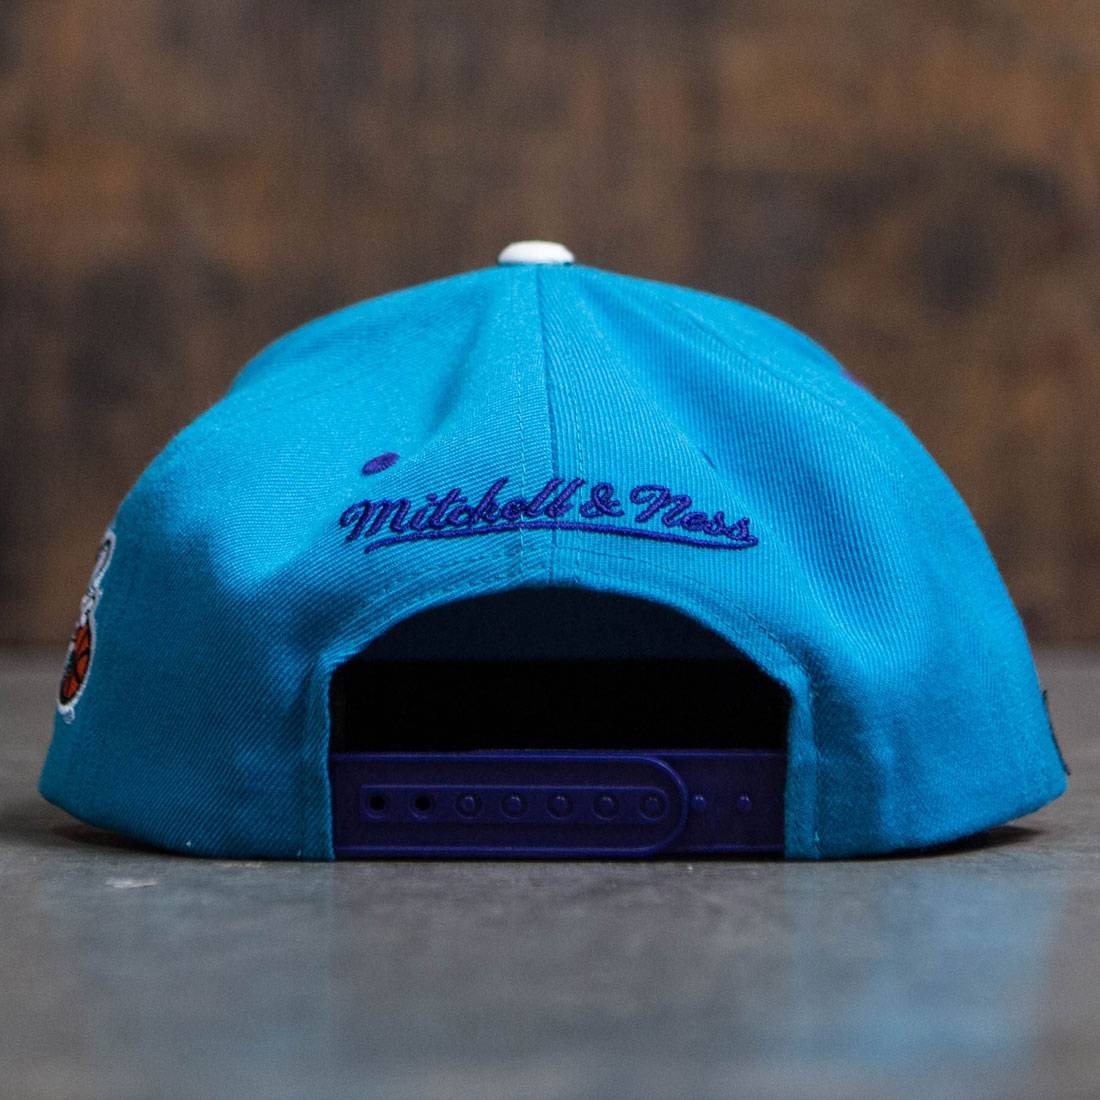 Charlotte Hornets Wool Solid Black/White Snapback - Mitchell & Ness